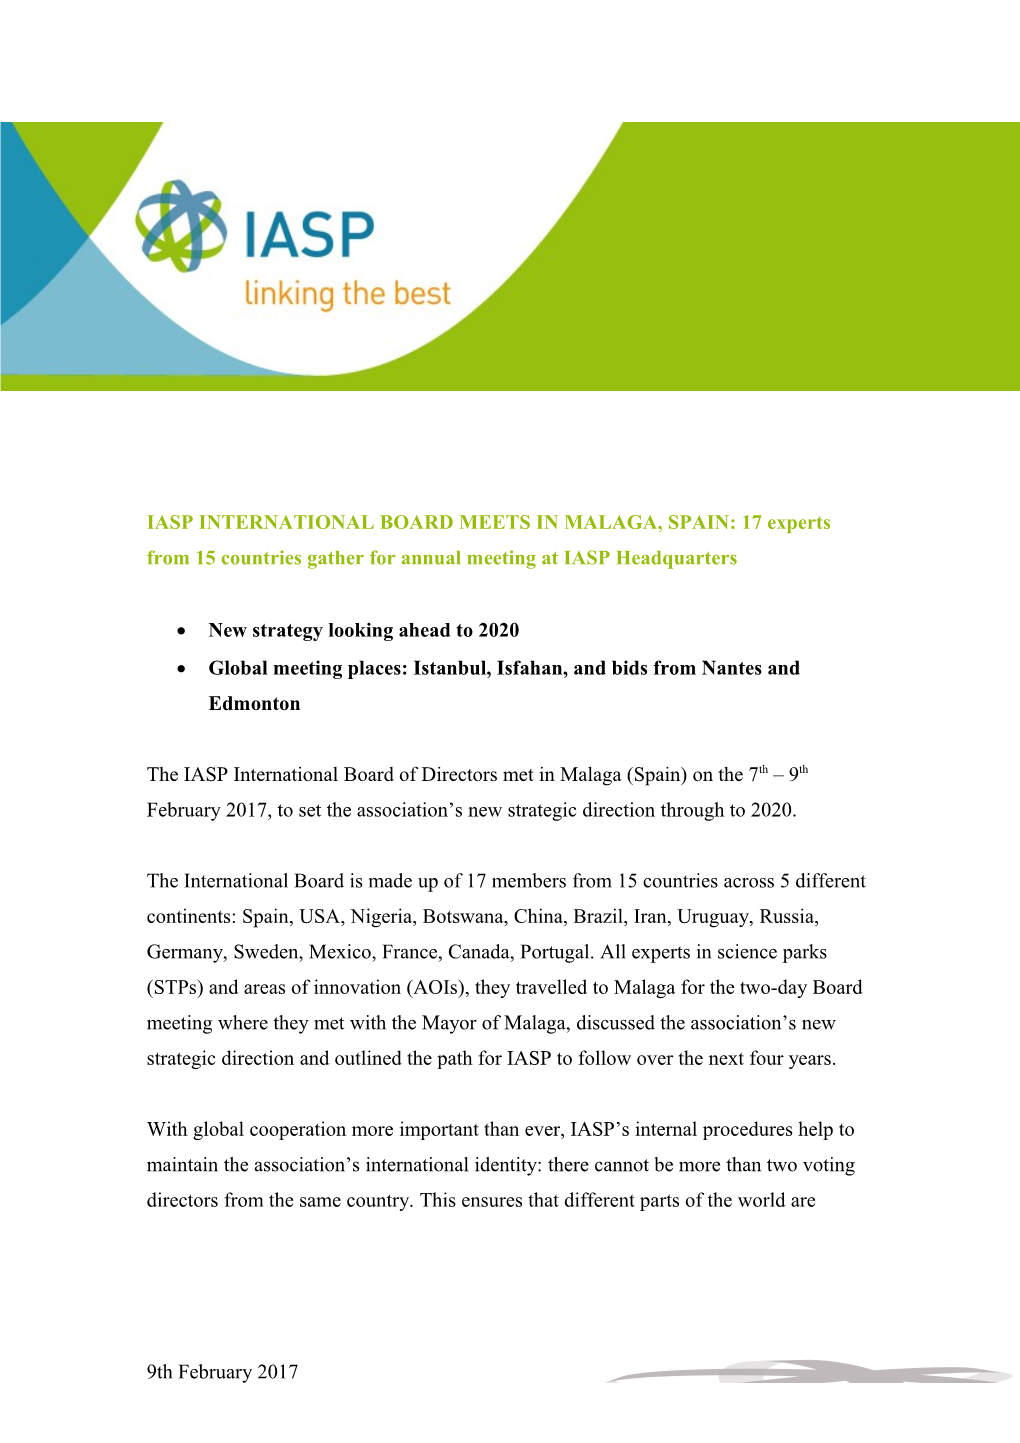 IASP INTERNATIONAL BOARD MEETS in MALAGA, SPAIN: 17 Experts from 15 Countries Gather For